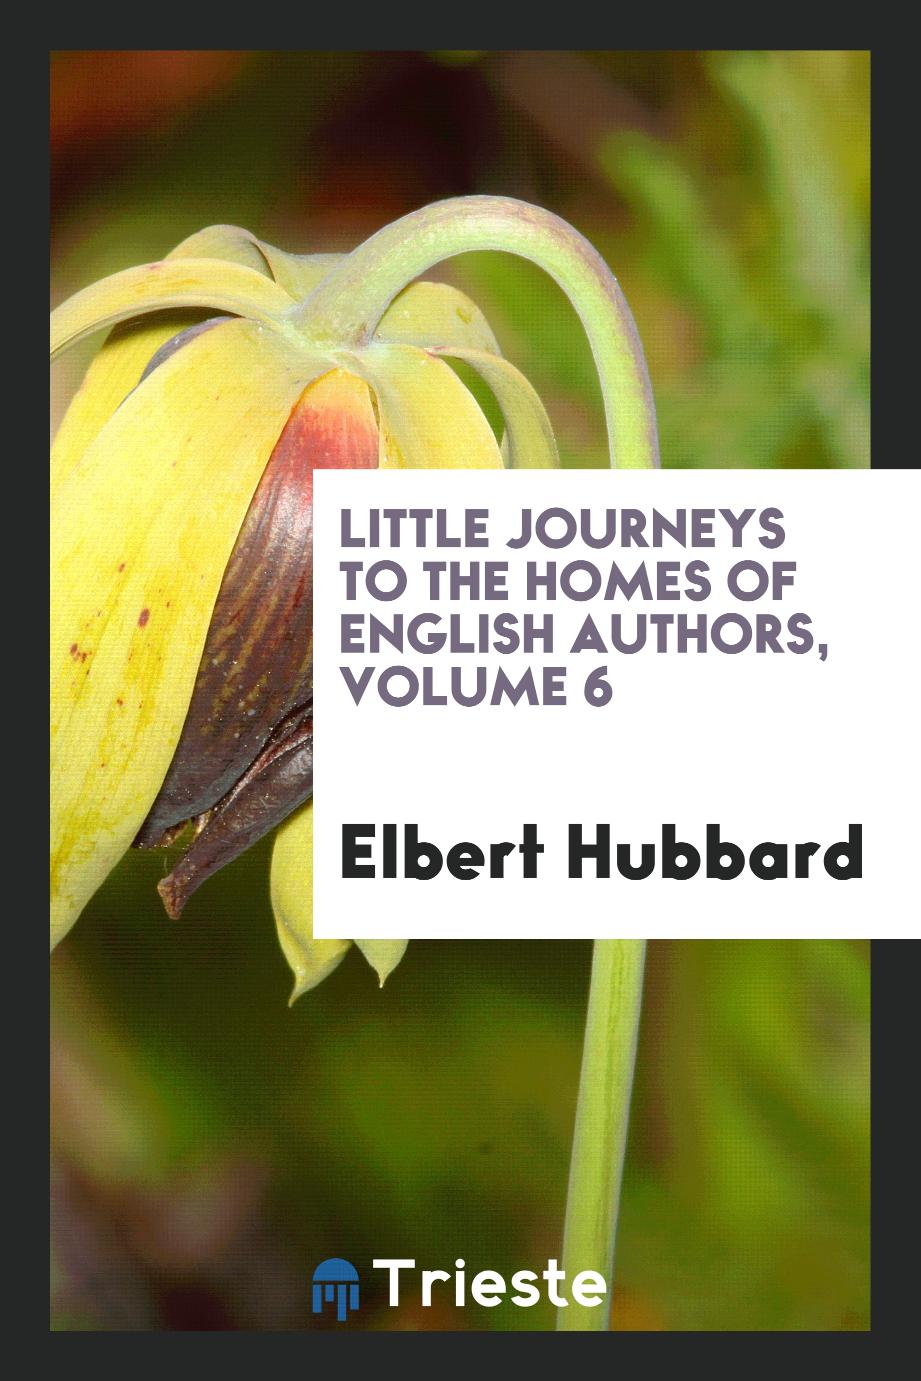 Little journeys to the homes of English authors, Volume 6